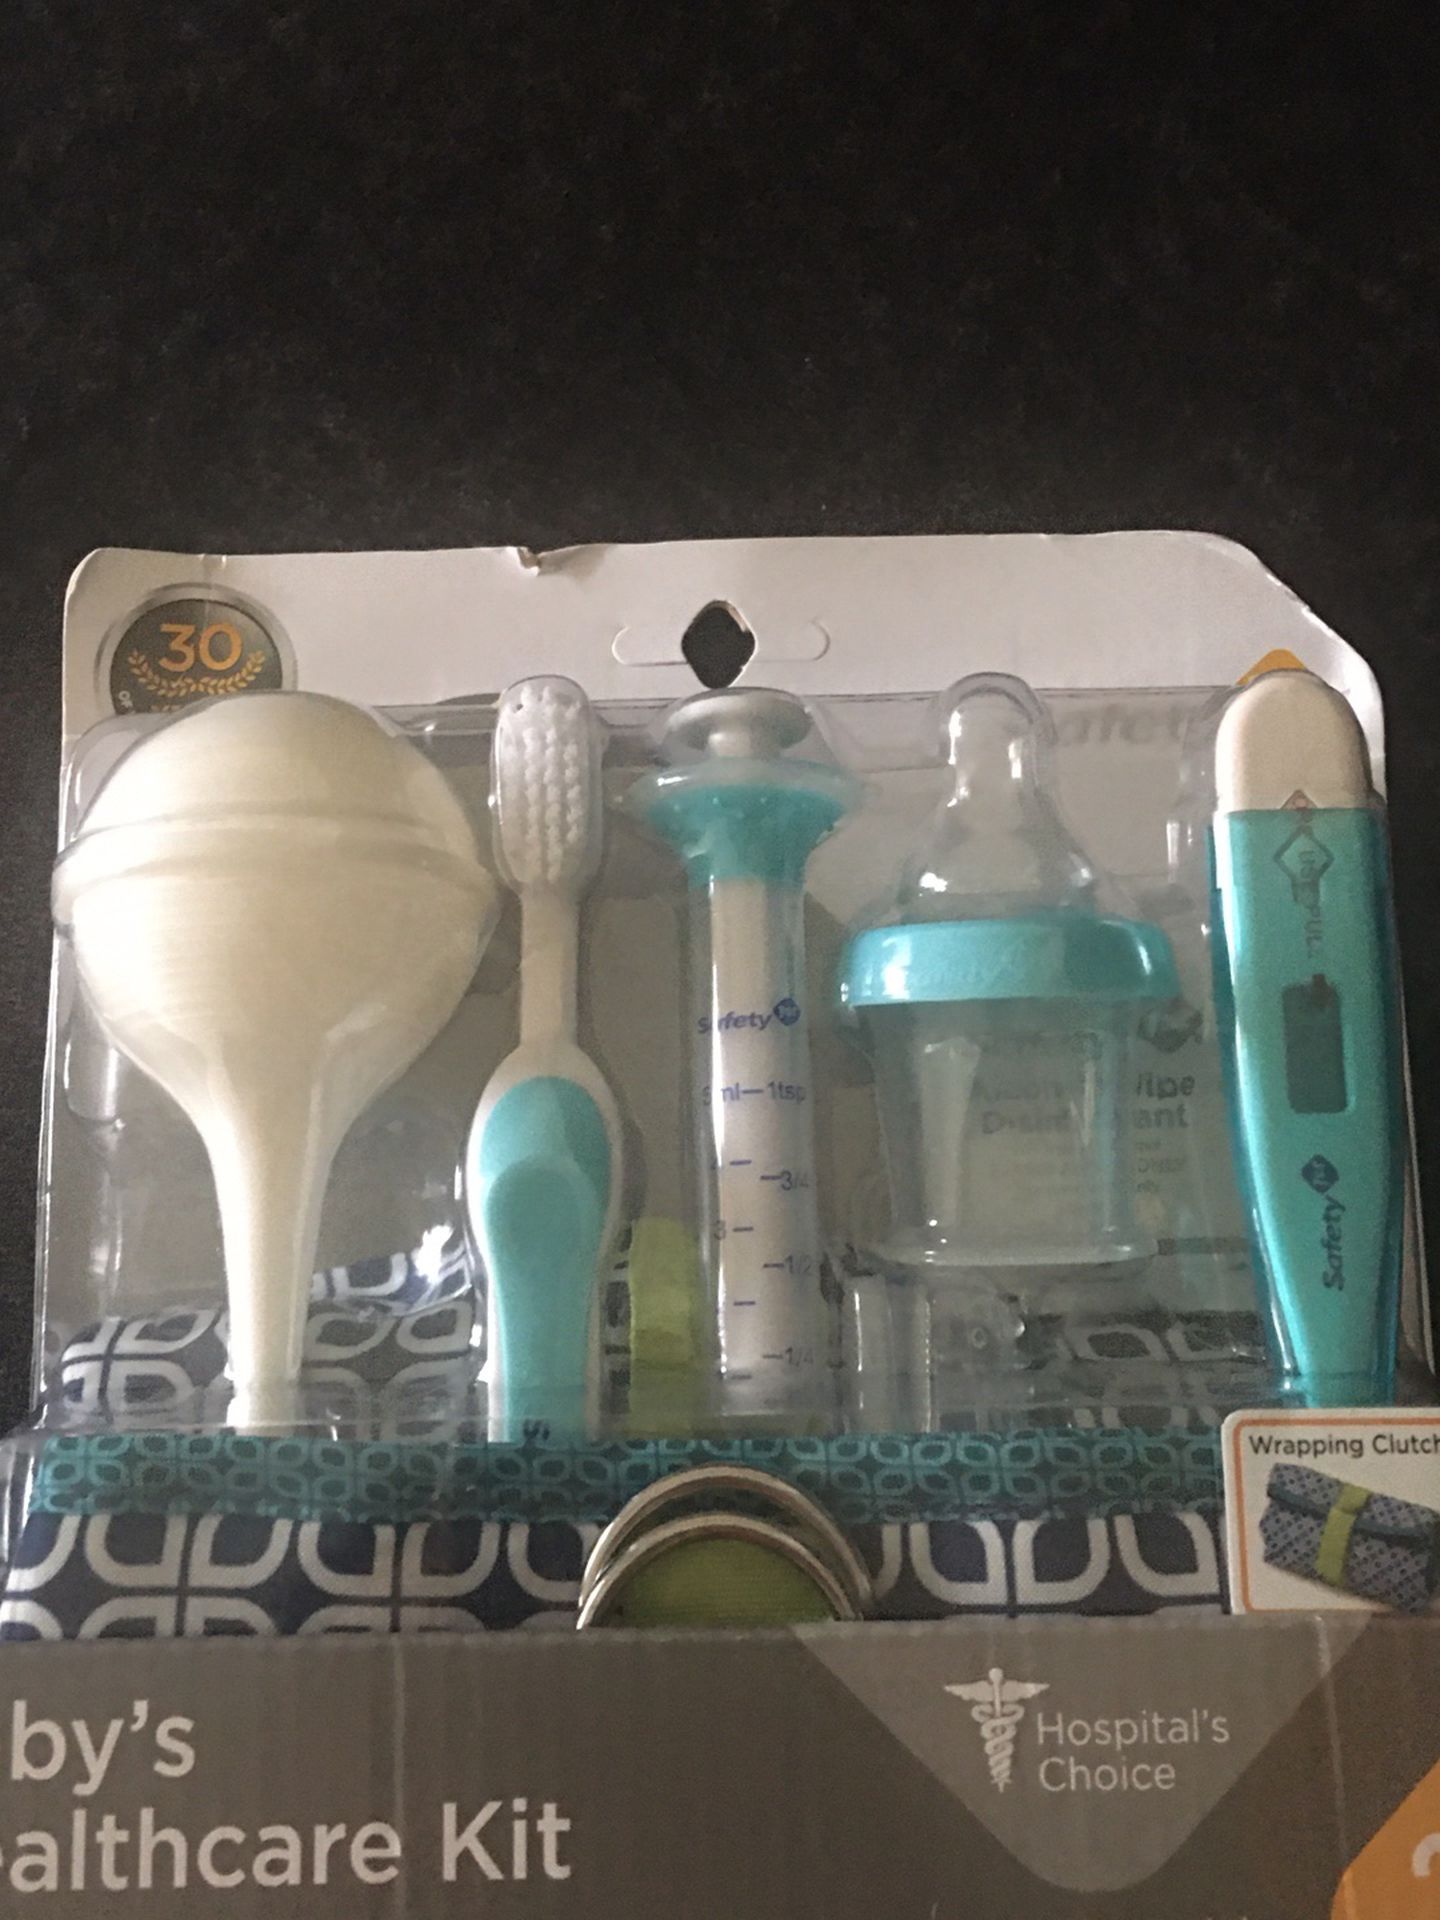 Safety 1st - Baby's Healthcare Kit